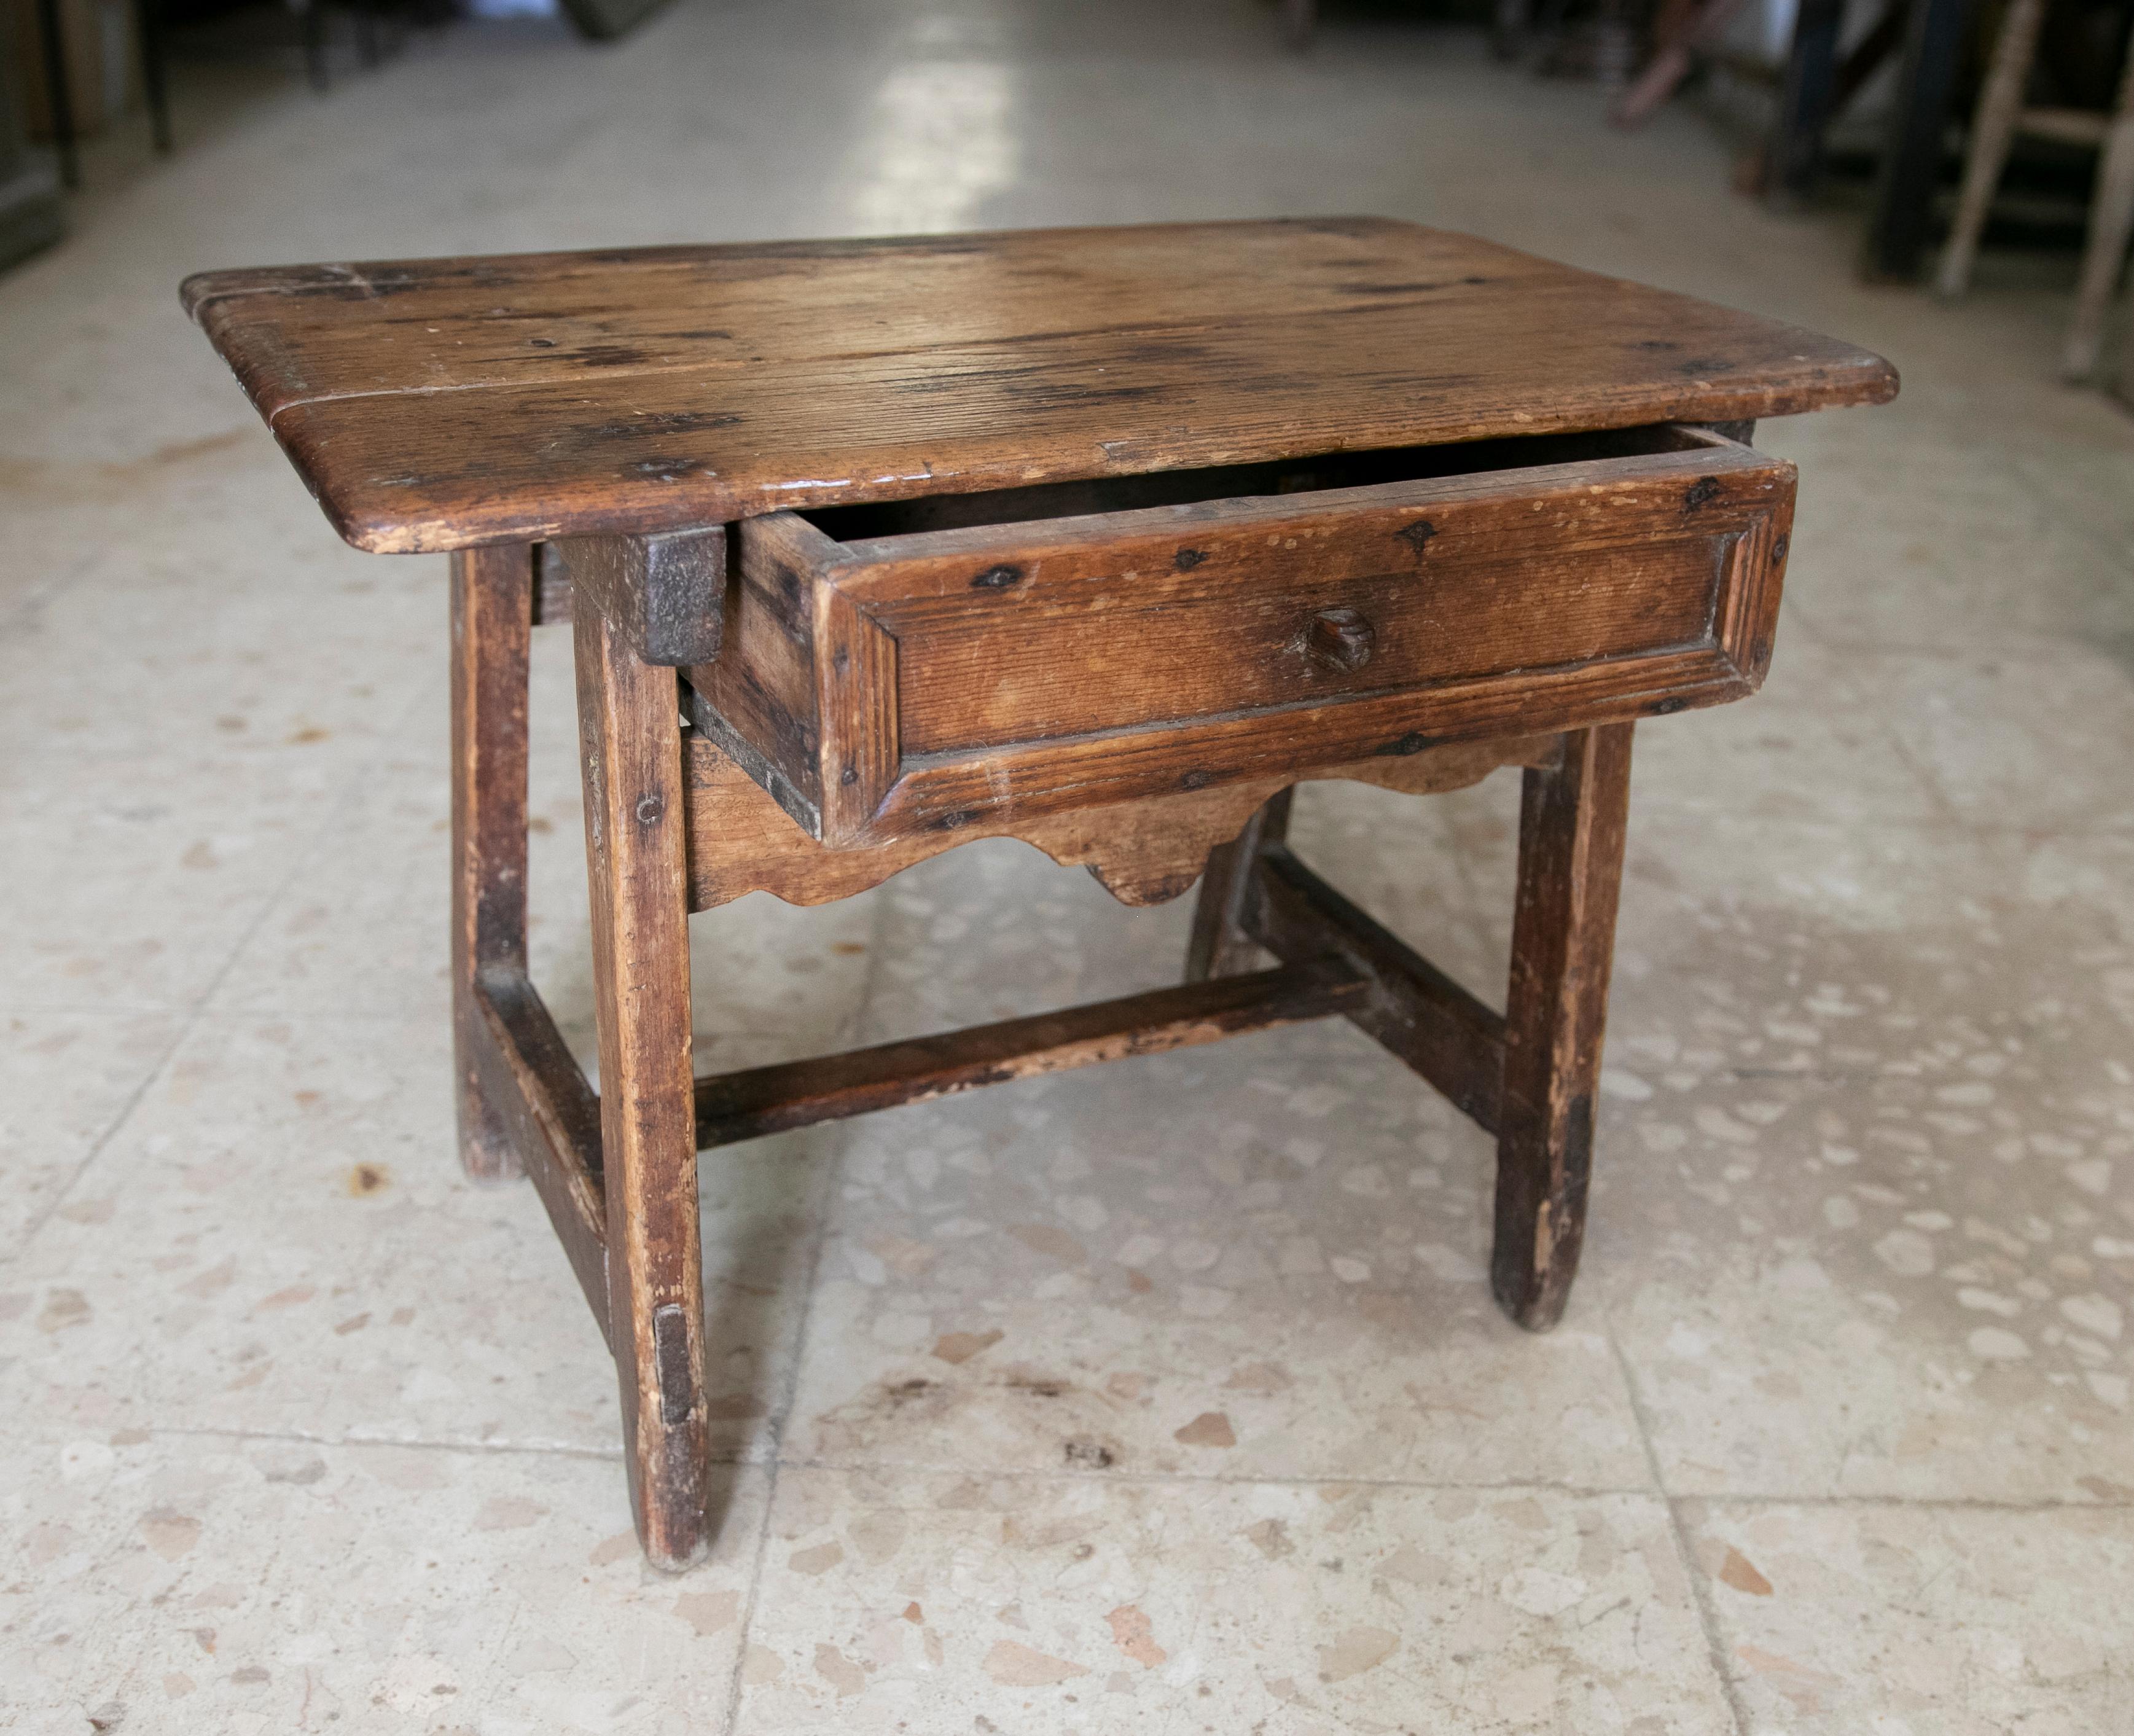 Spanish wooden sidetable with a drawer.